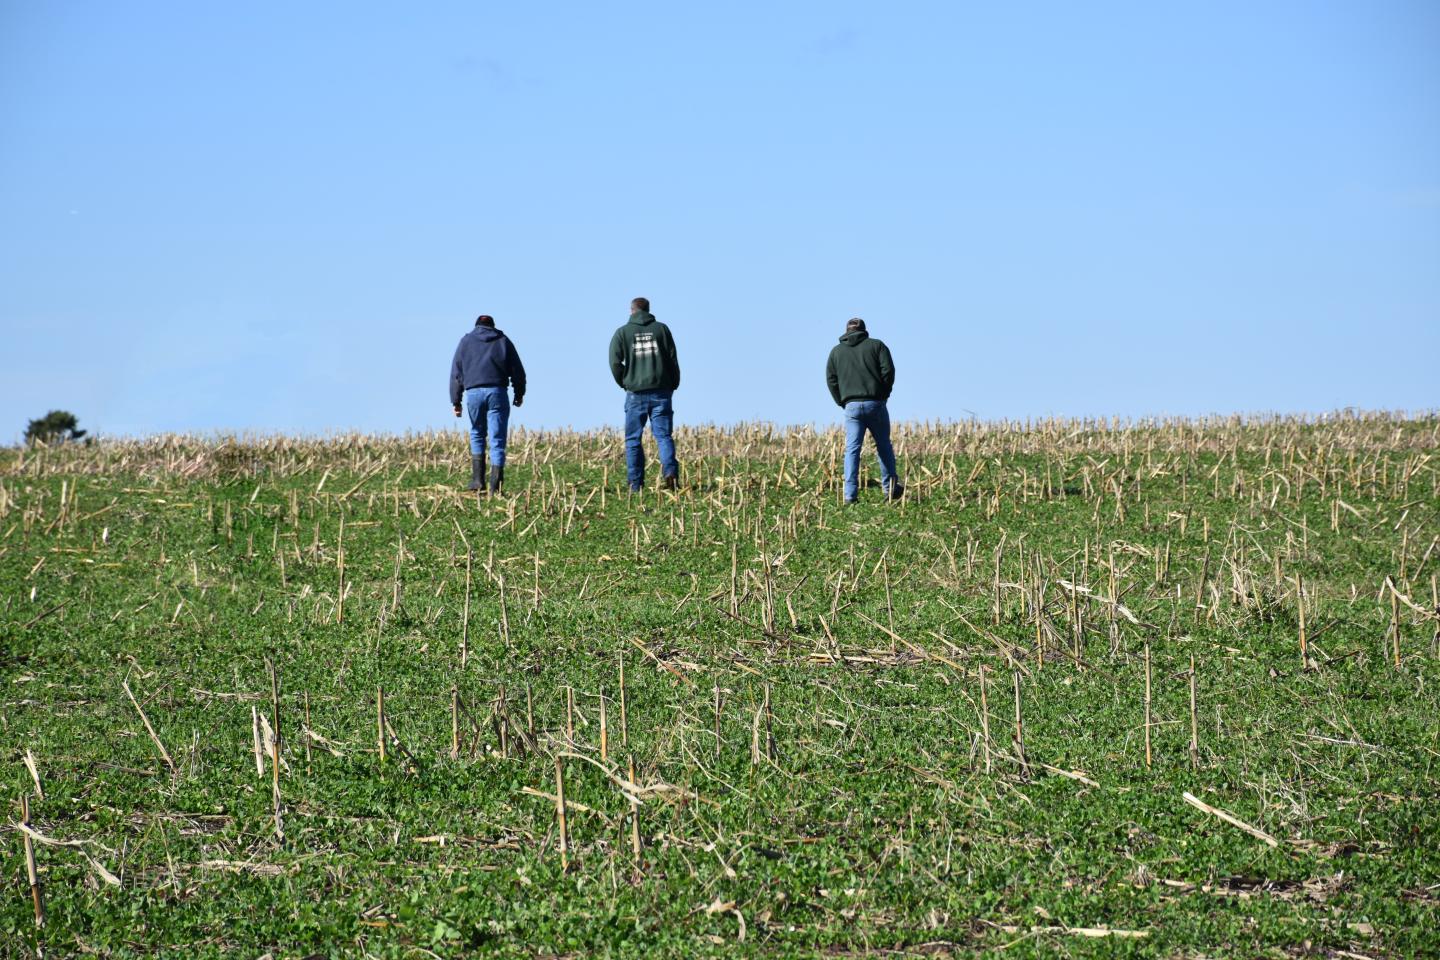 NRCS staff walking through field with producers.